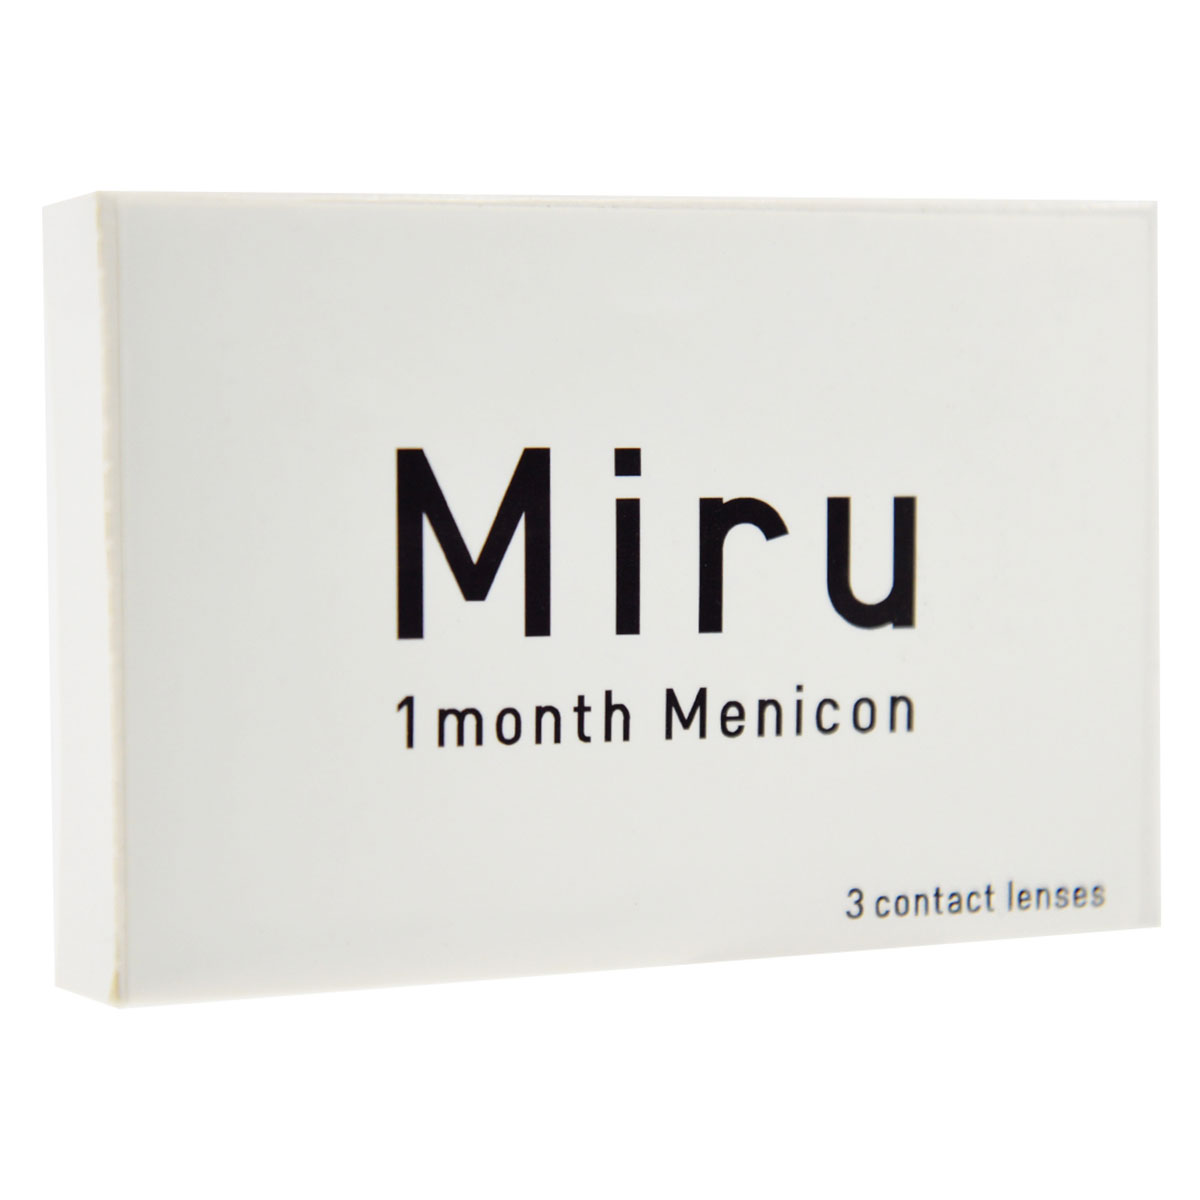 Miru 1month (3 Contact Lenses), Menicon, Monthly Lenses, Silicone Hydrogel